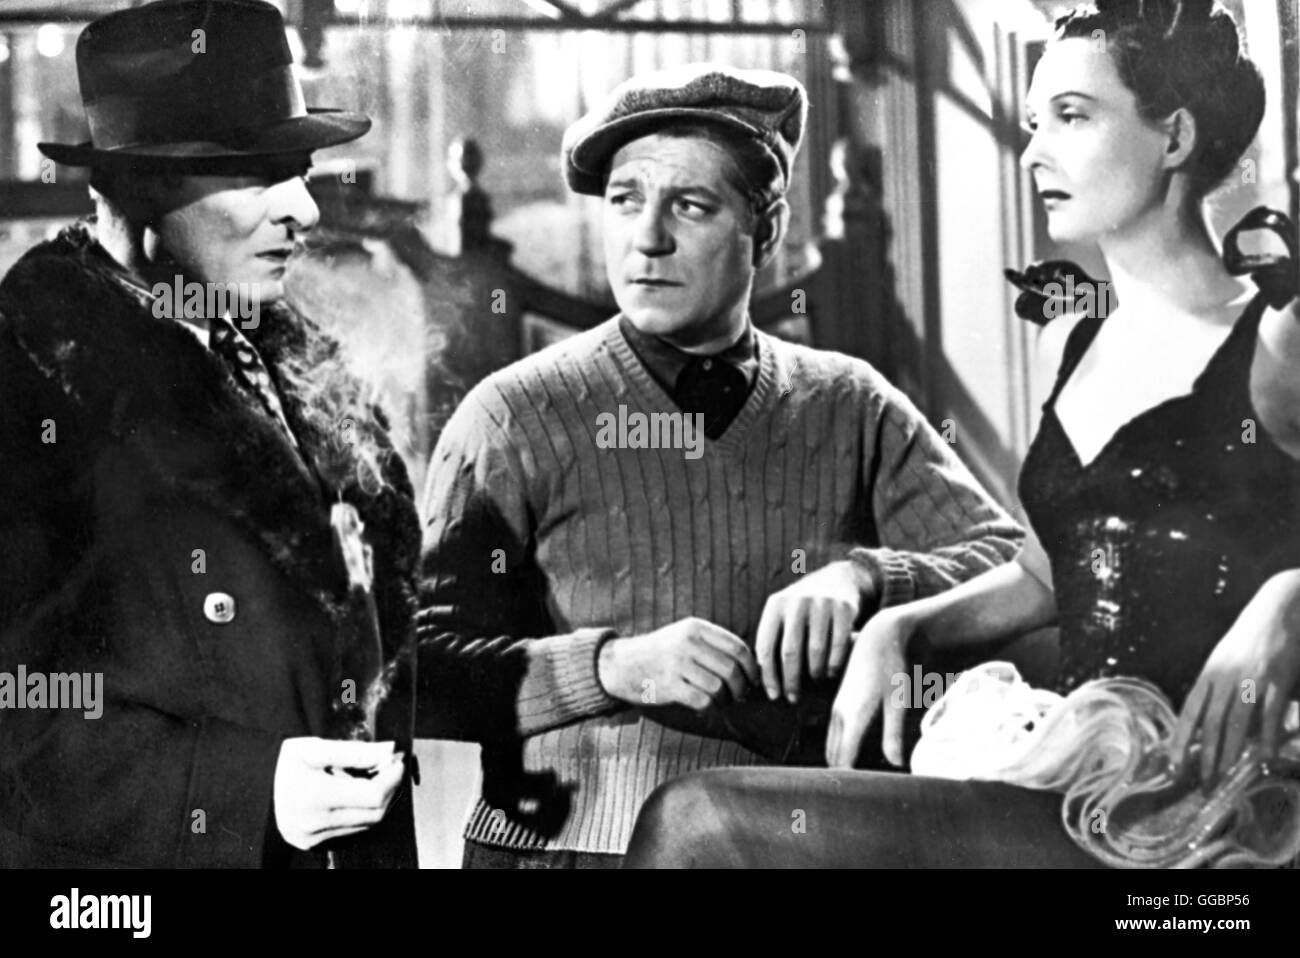 Le Jour Se Leve [Daybreak] (Original photograph from the 1939 film) by  Marcel Carne (director); Raymond Voinquel (photographer); Jacques Viot,  Jacques Prevert (screenwriters); Jean Gabin, Jacqueline Laurent, Jules  Berry, Arletty (starring): (1939)